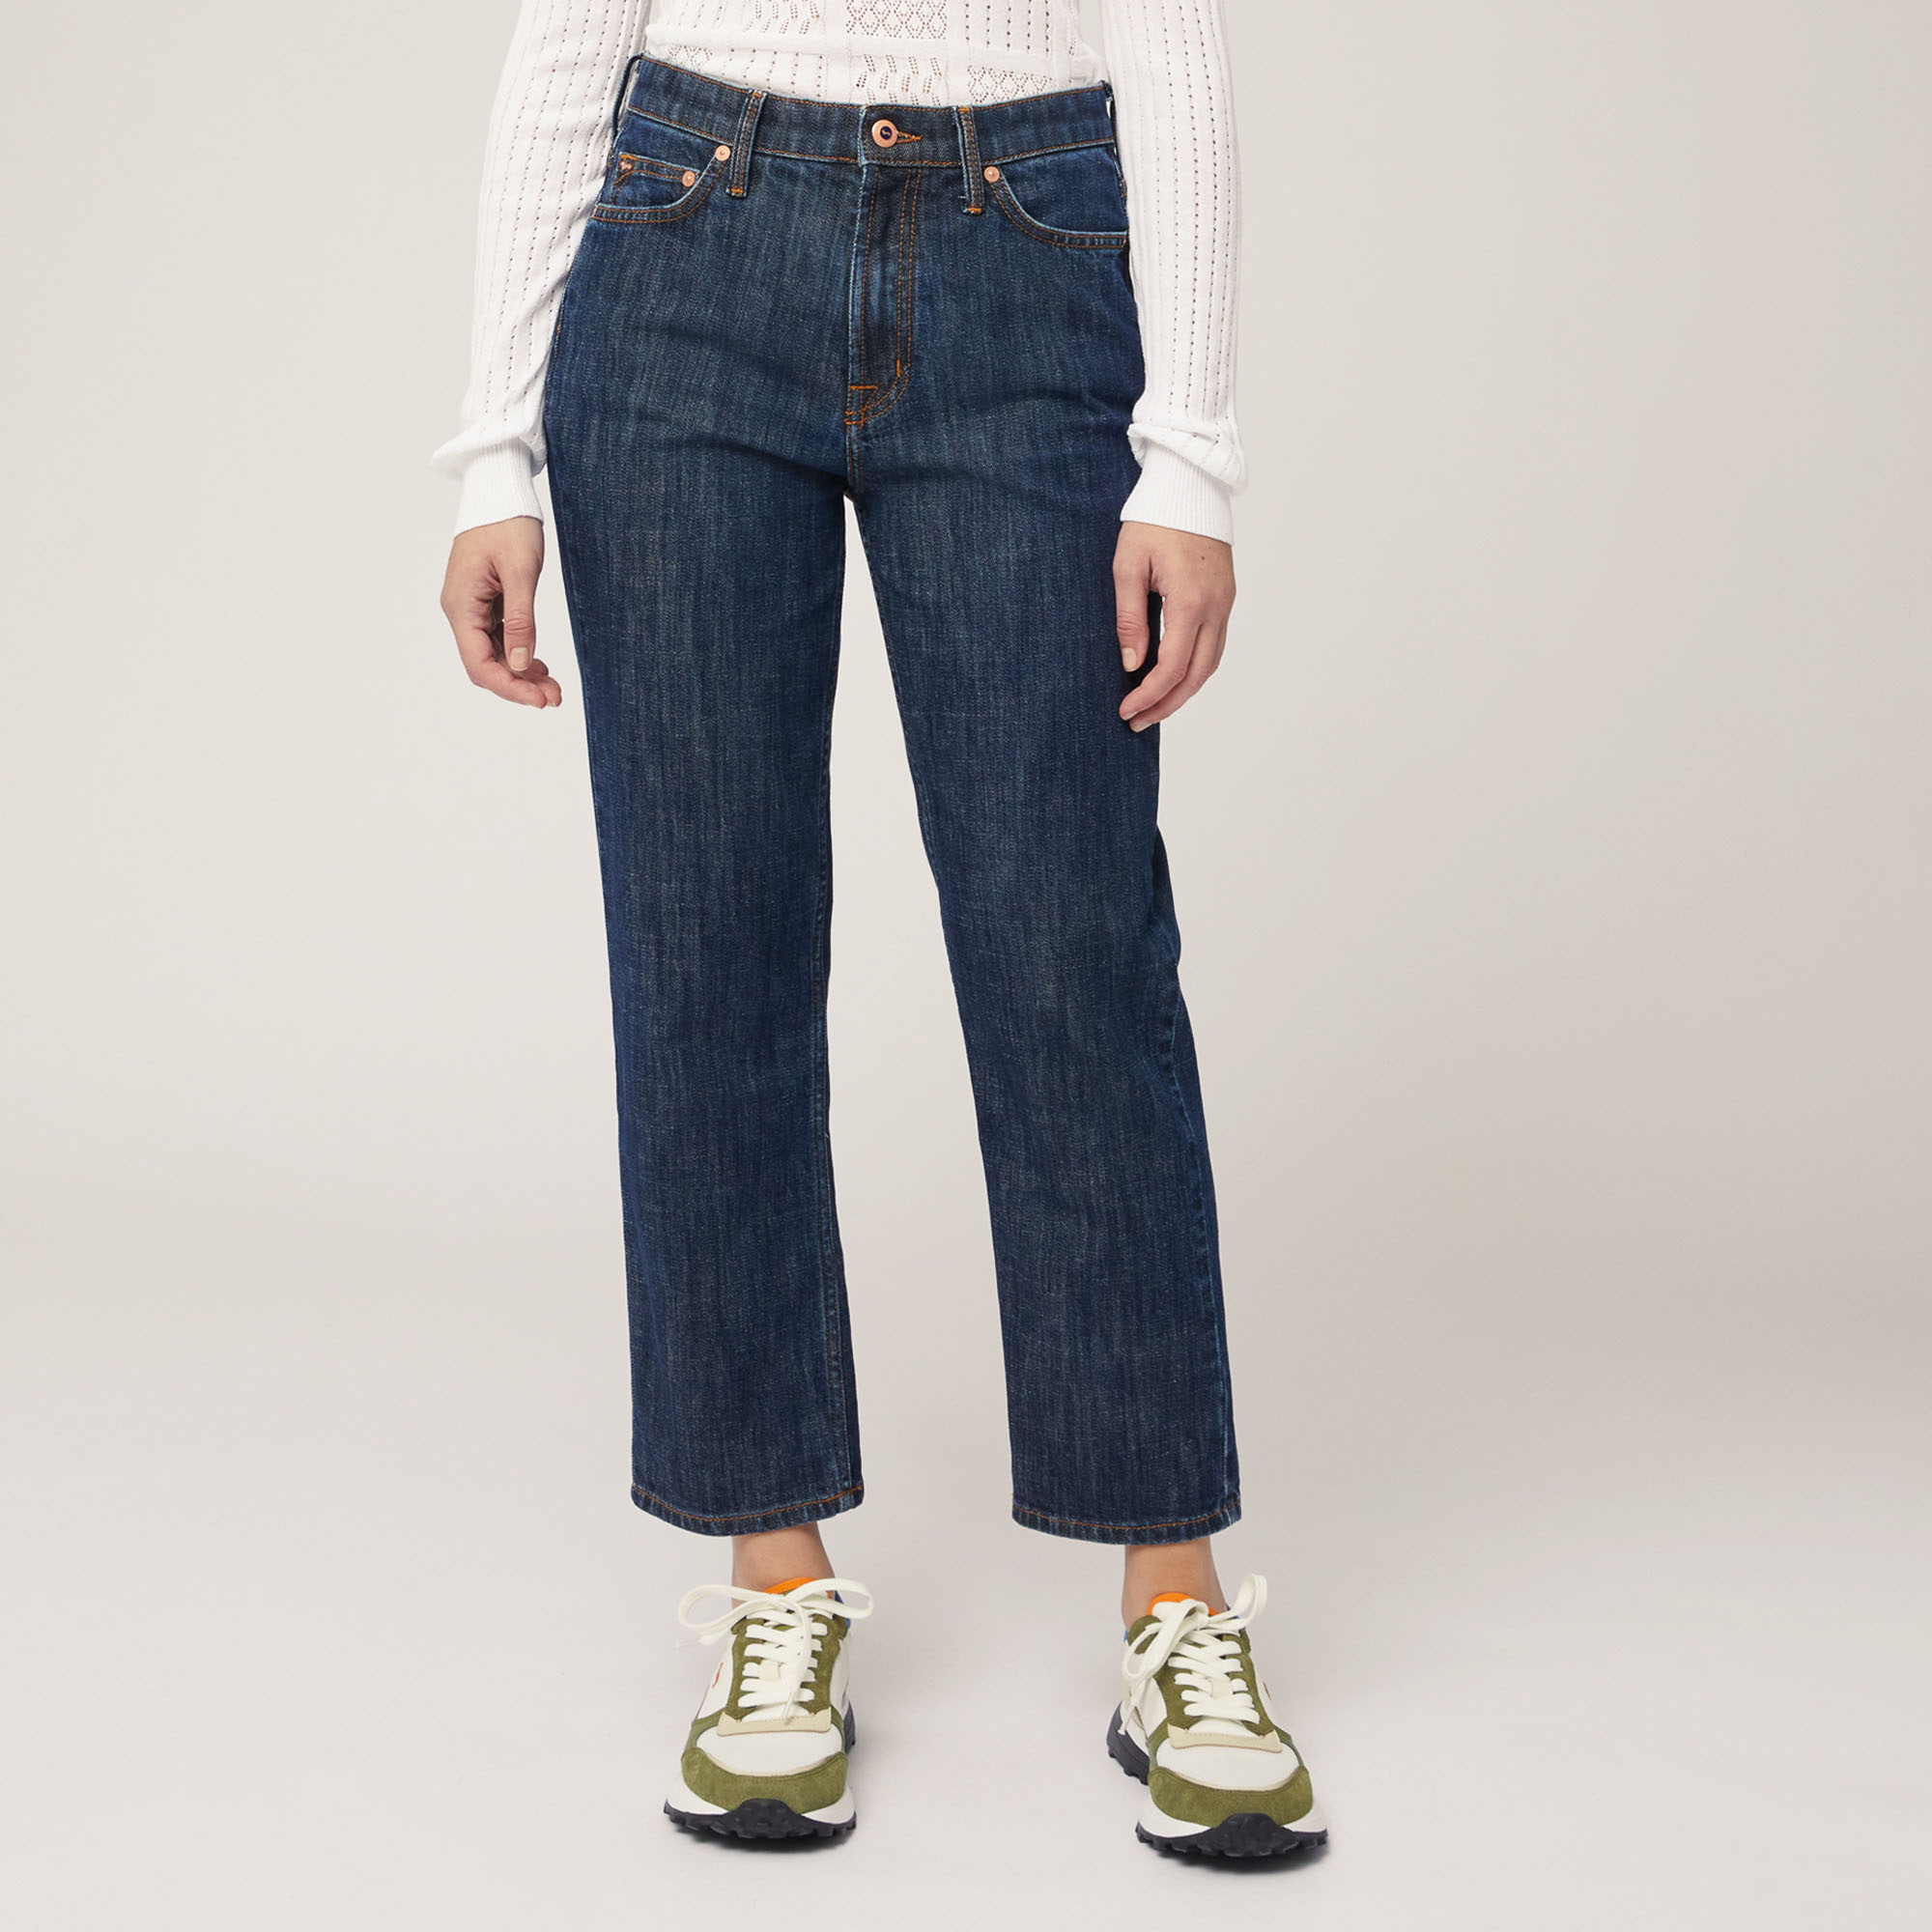 Denim Trousers with Striped Label